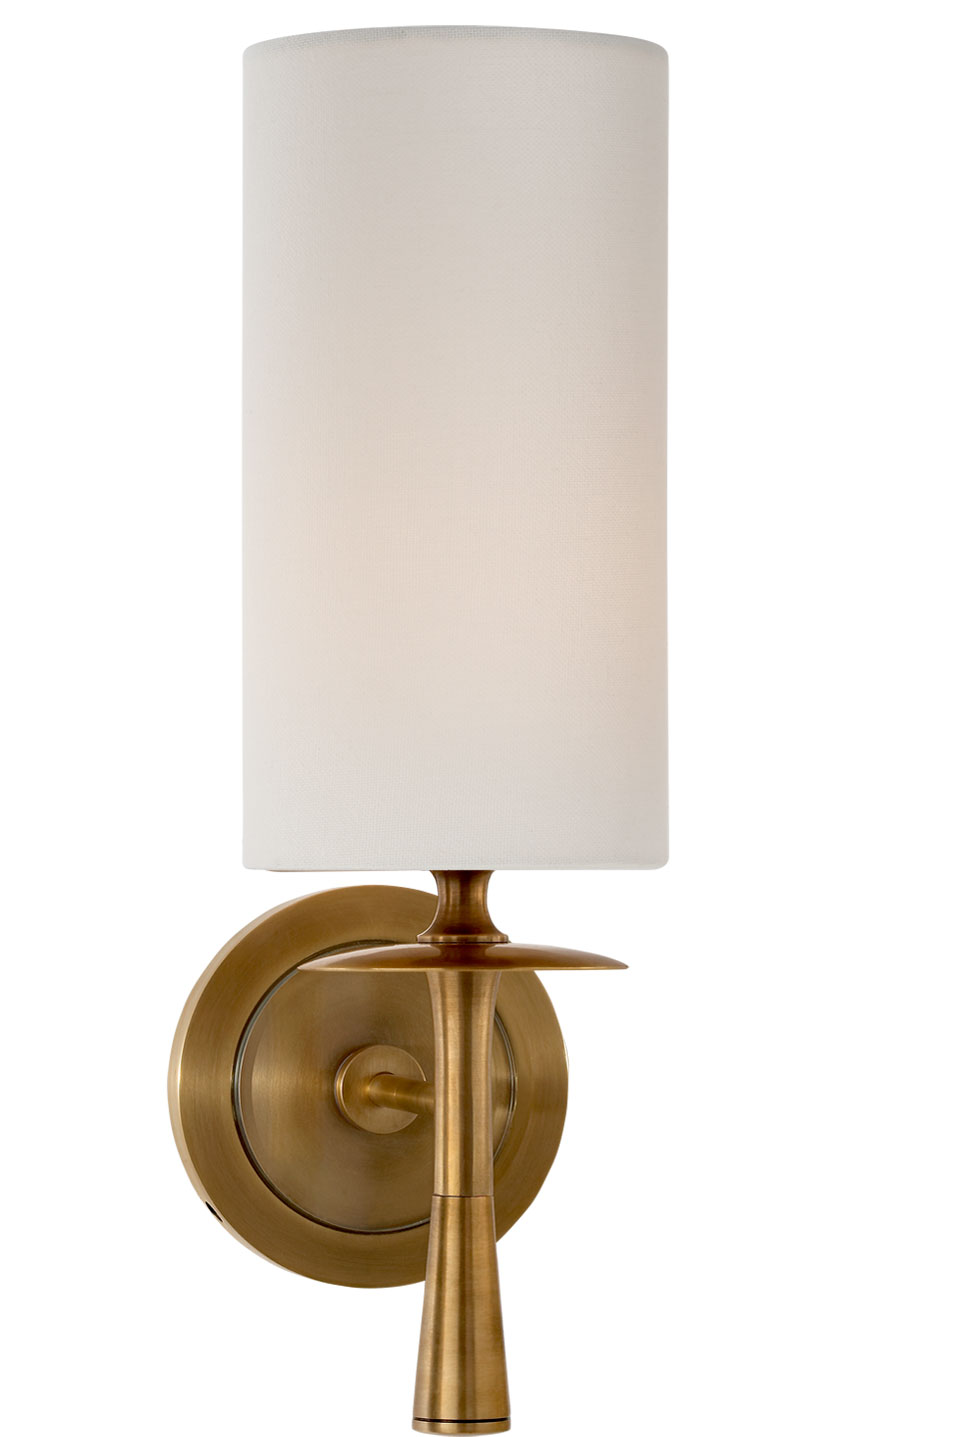 Drunmore classic wall light in gold plated metal. Visual Comfort&Co.. 